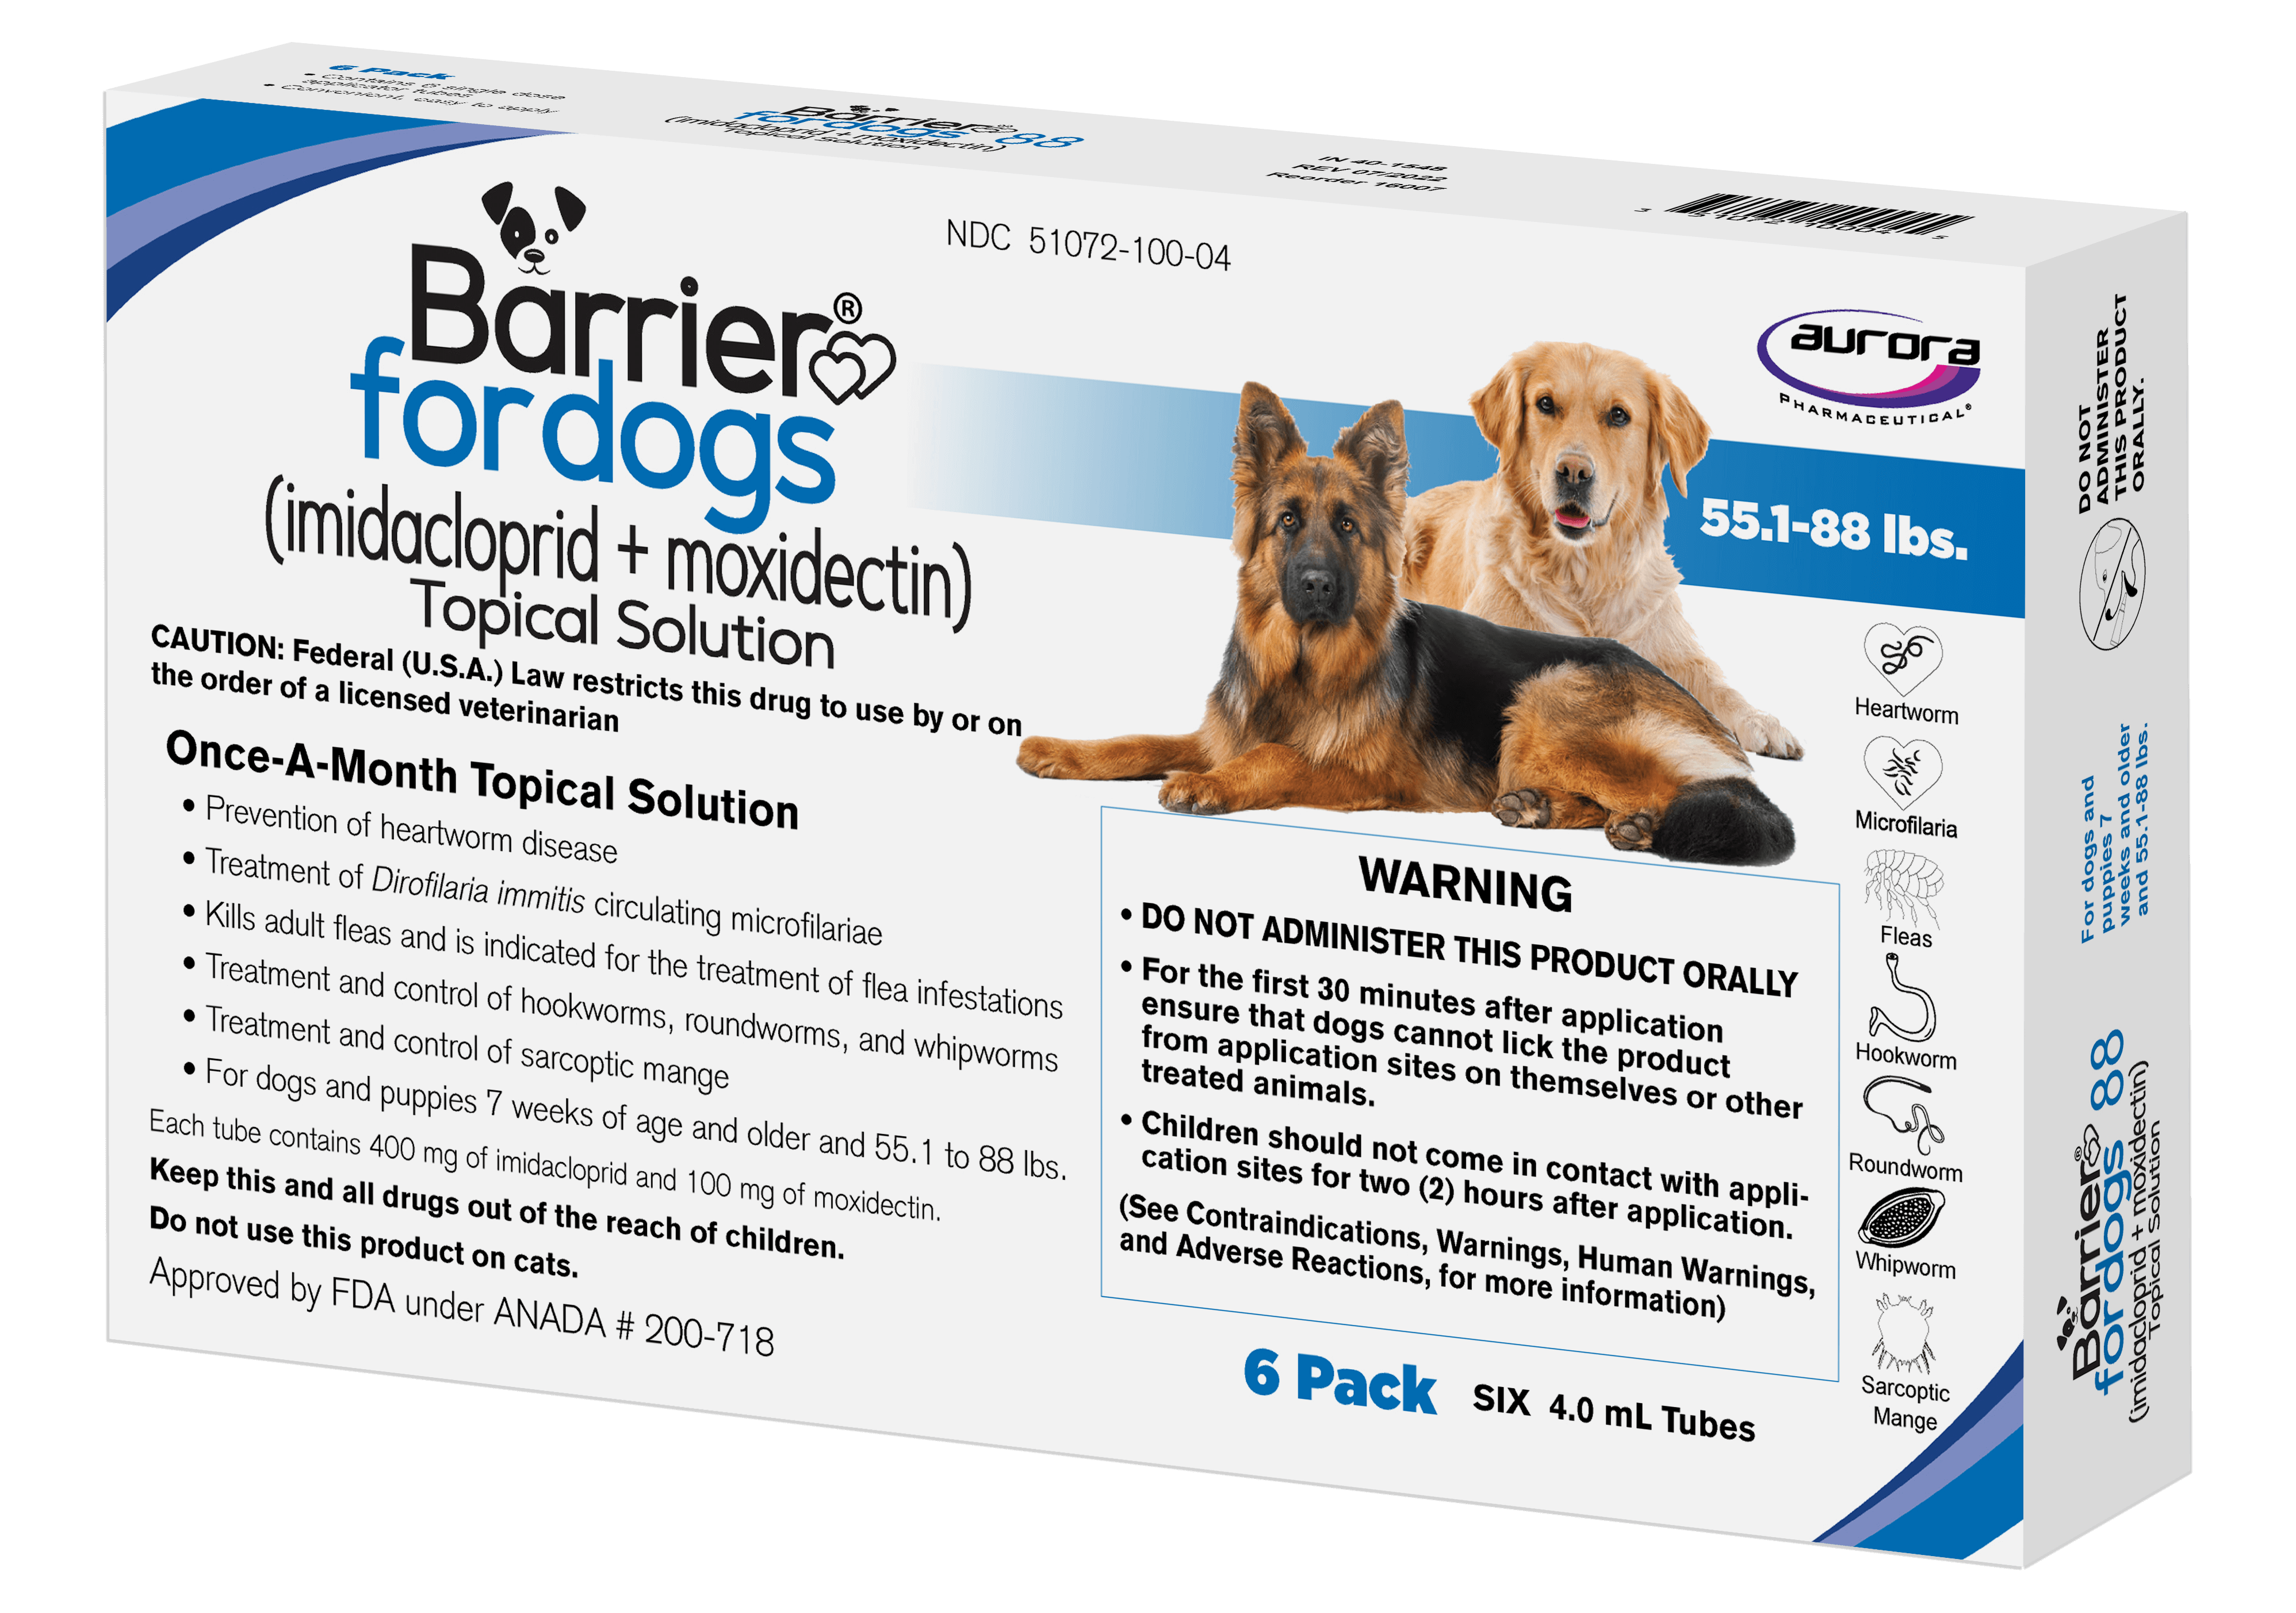 barrier-for-dogs-55.1-88-lbs-png.png